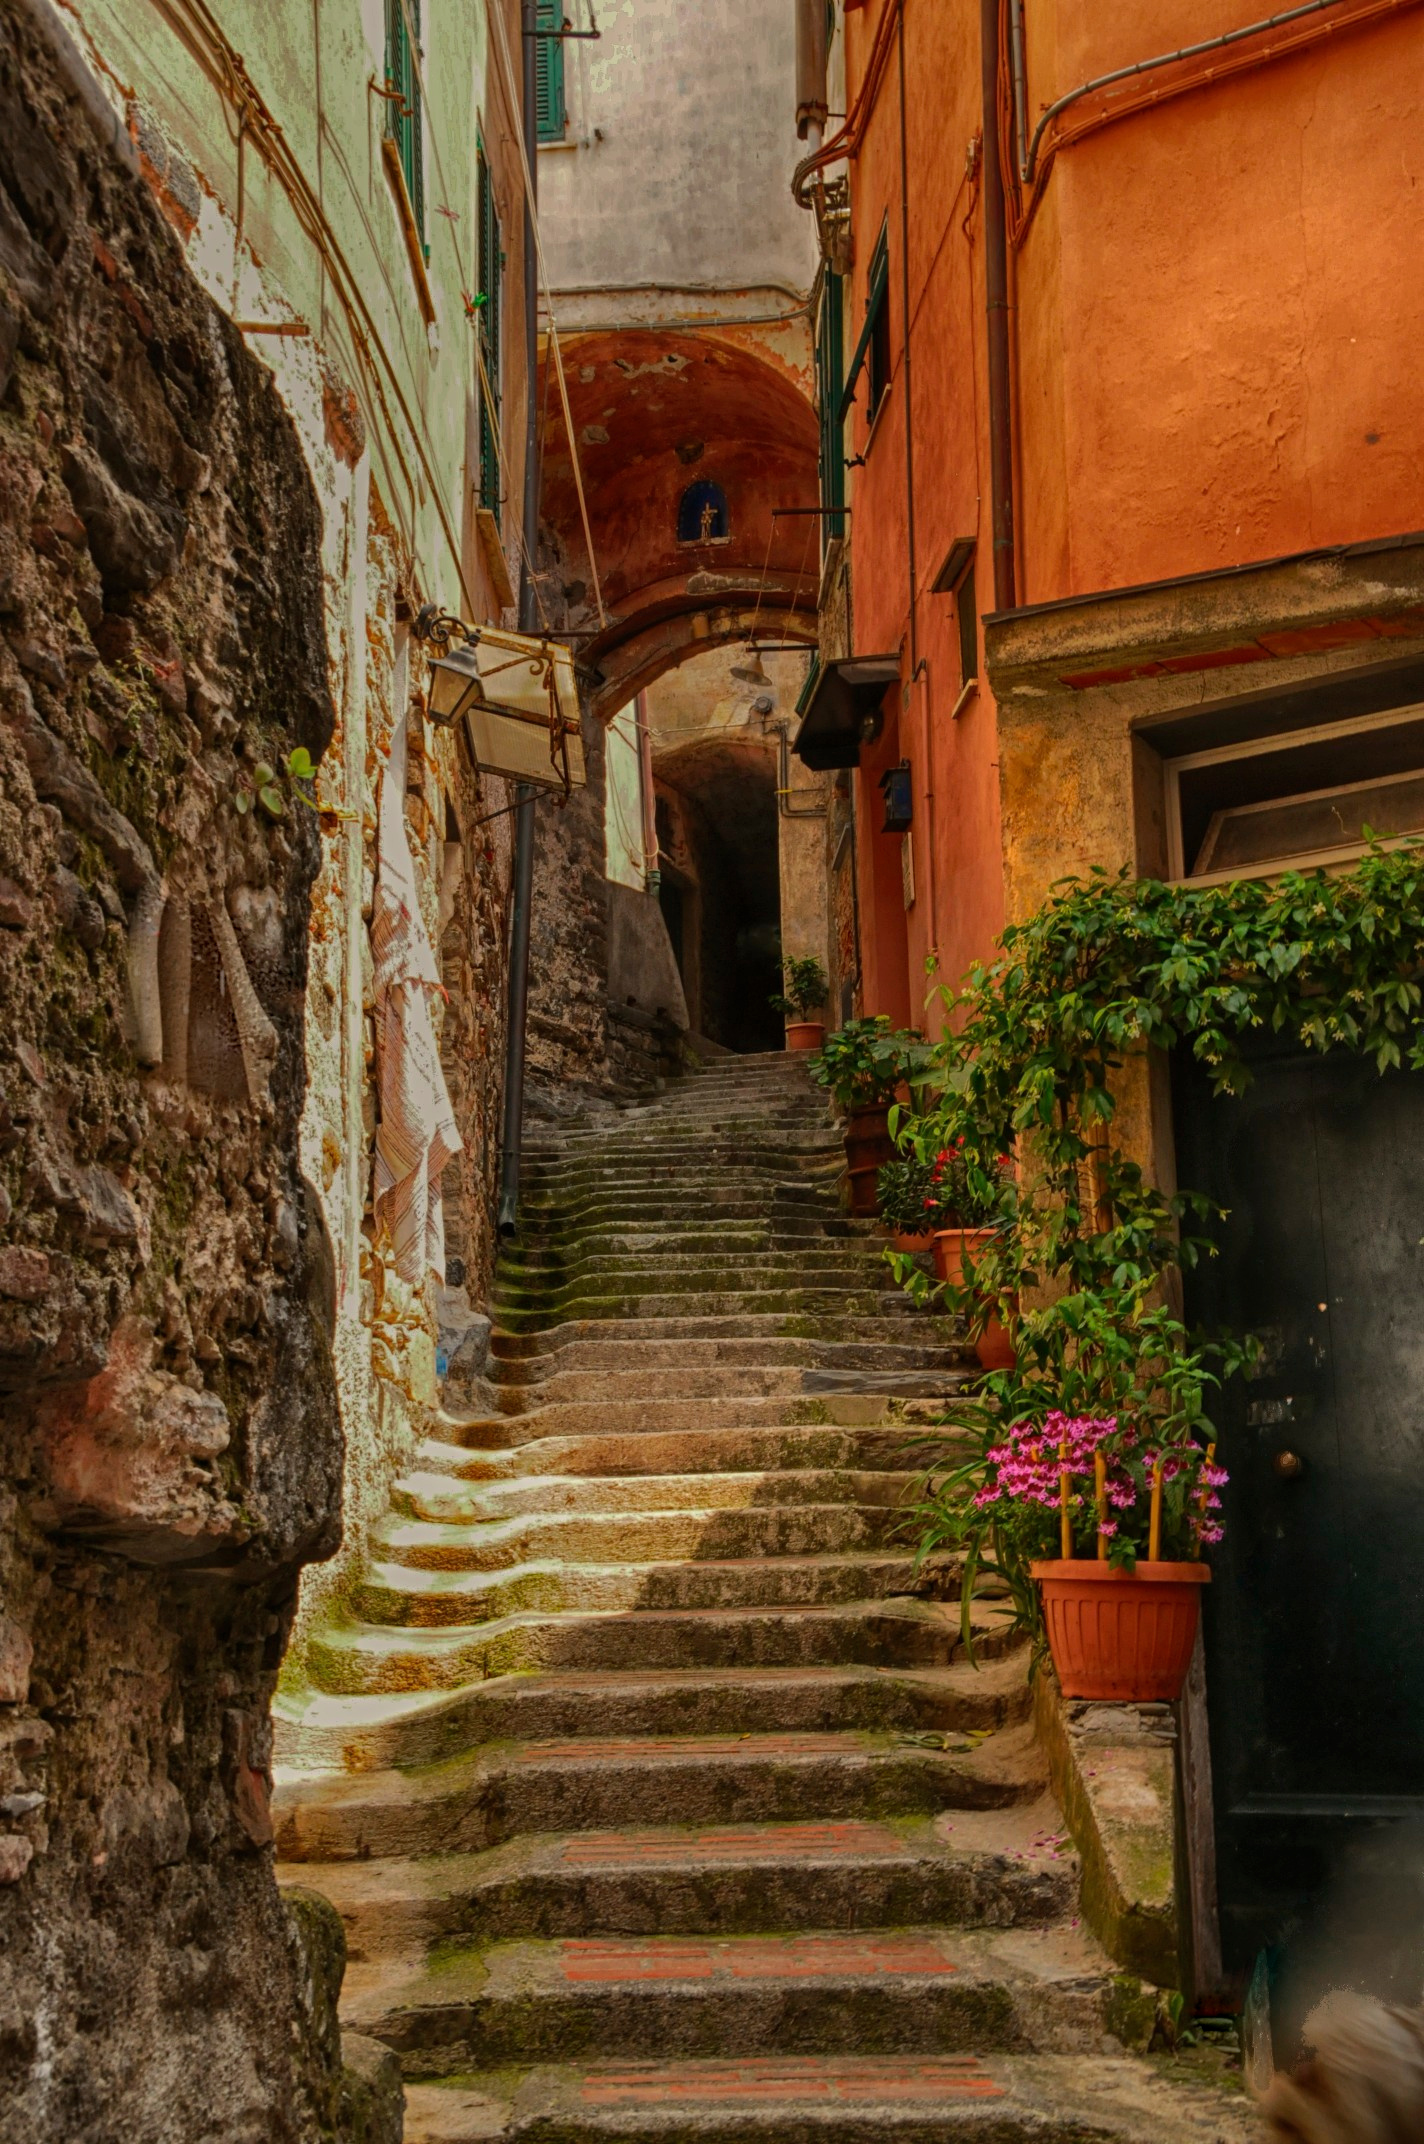 maria poole - Italy 11 second 045_HDR (1).jpg